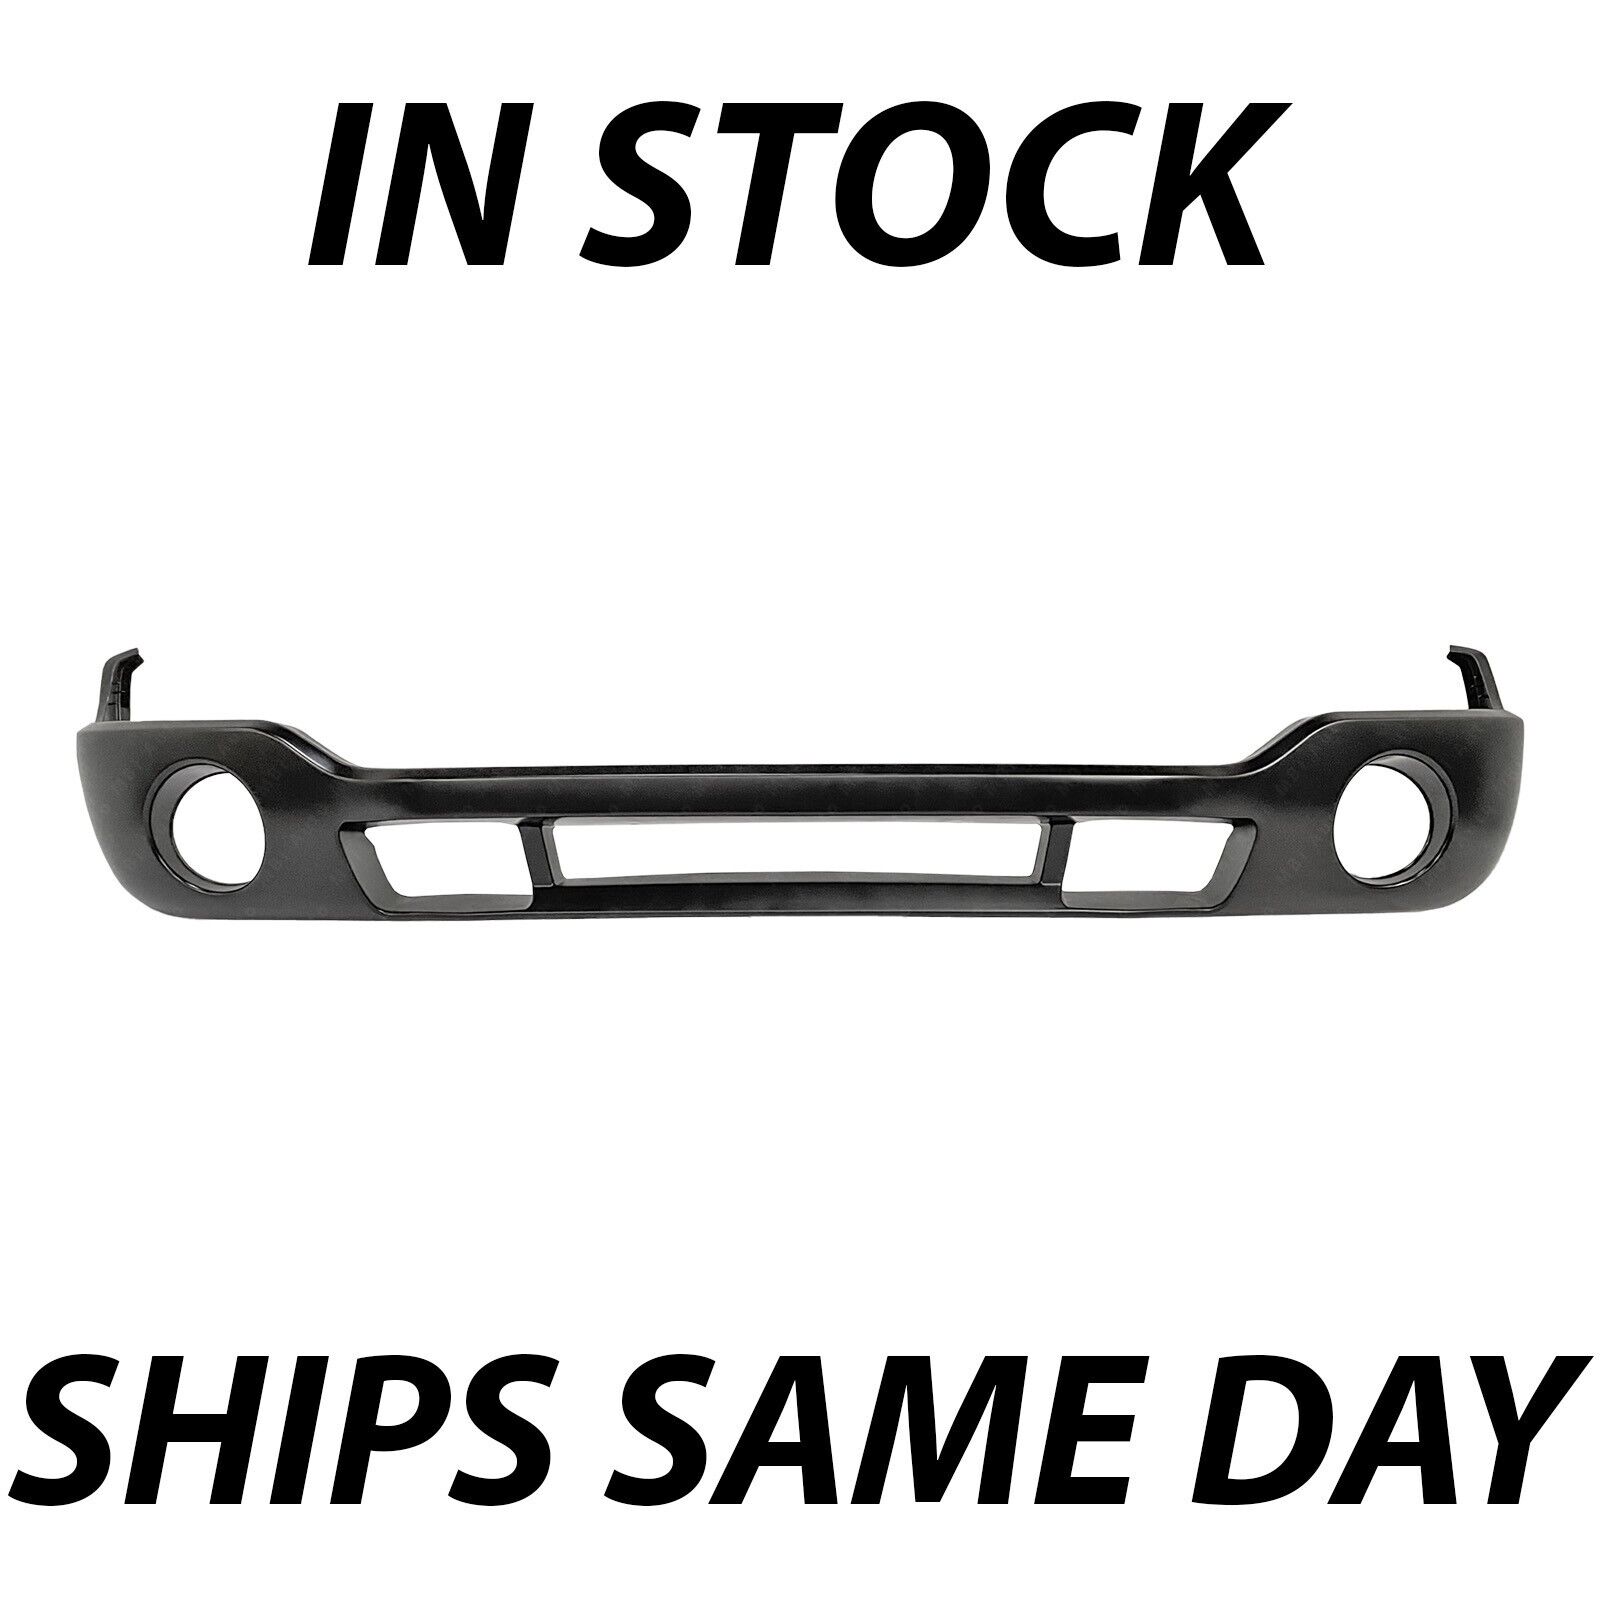 NEW Primered Lower Bumper Cover Valance for 1500 2500 HD Sierra 2003-2007 W/ Fog